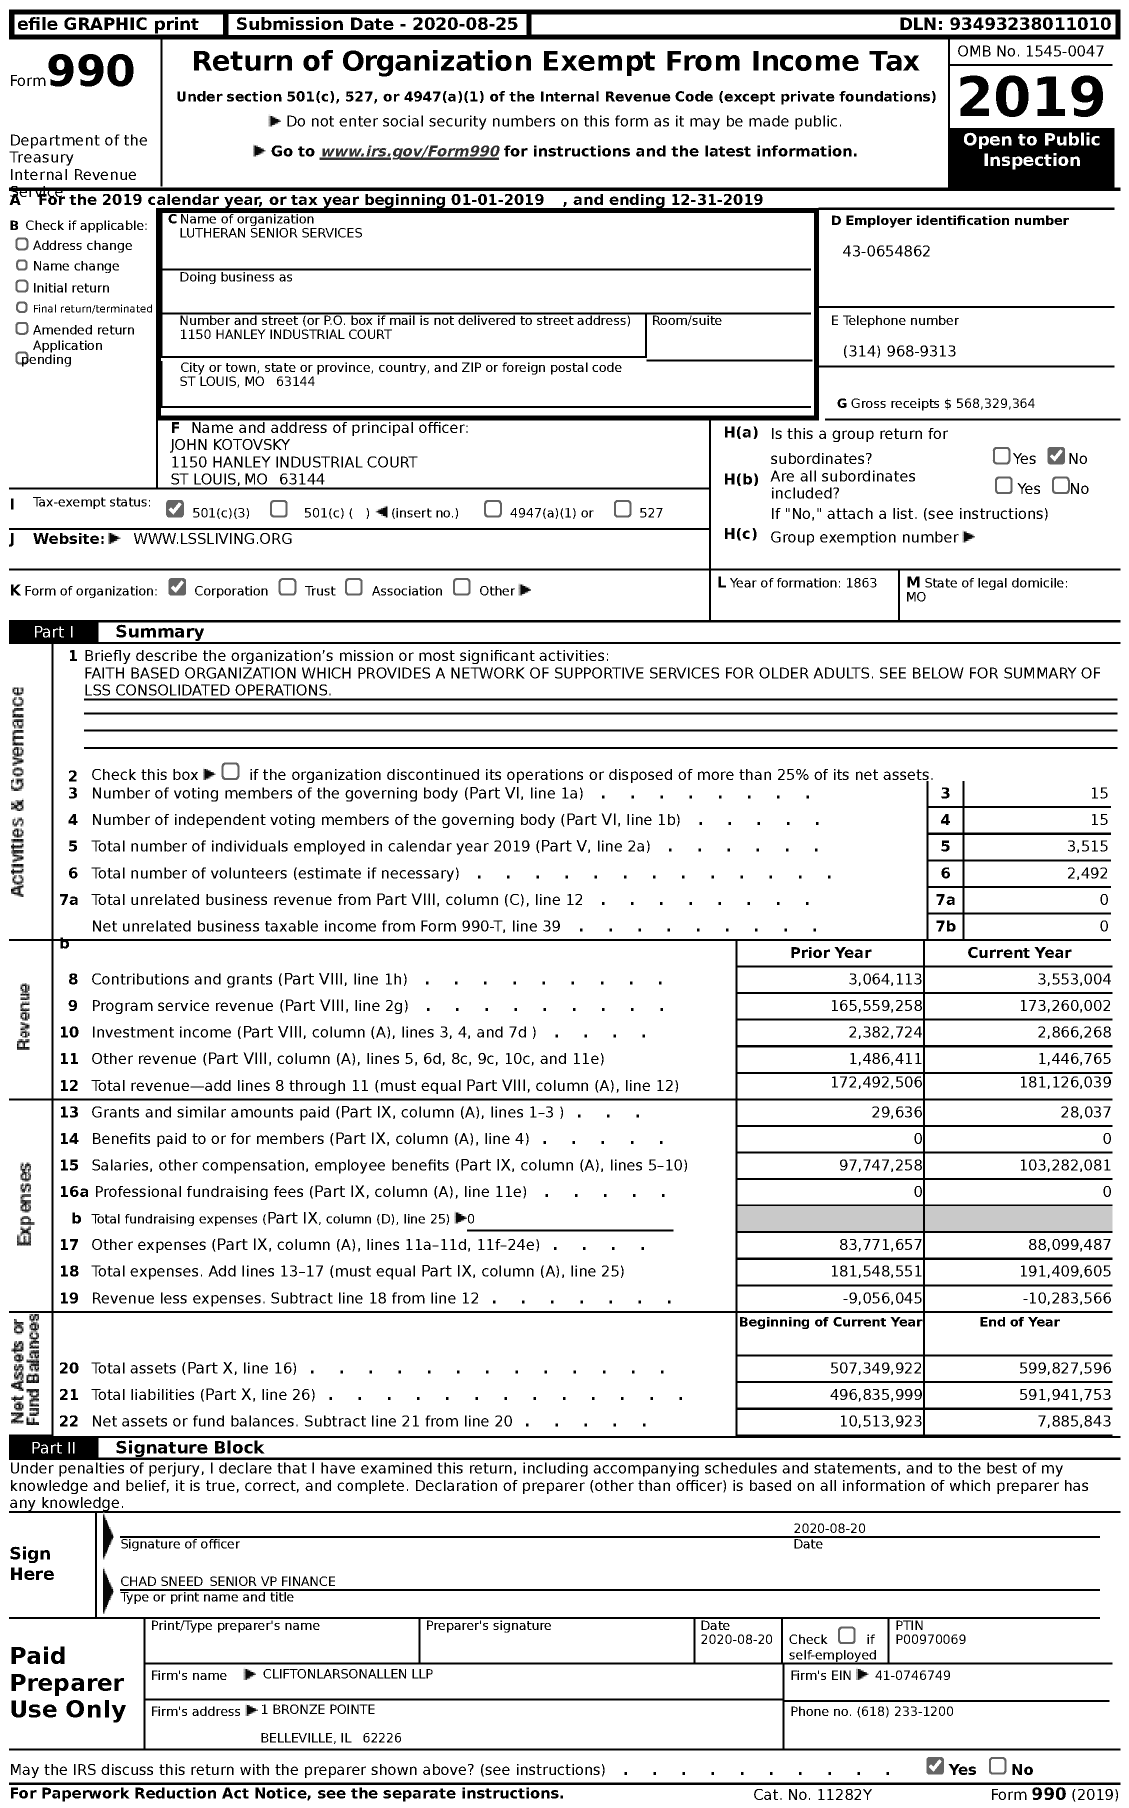 Image of first page of 2019 Form 990 for Lutheran Senior Services (LSS)